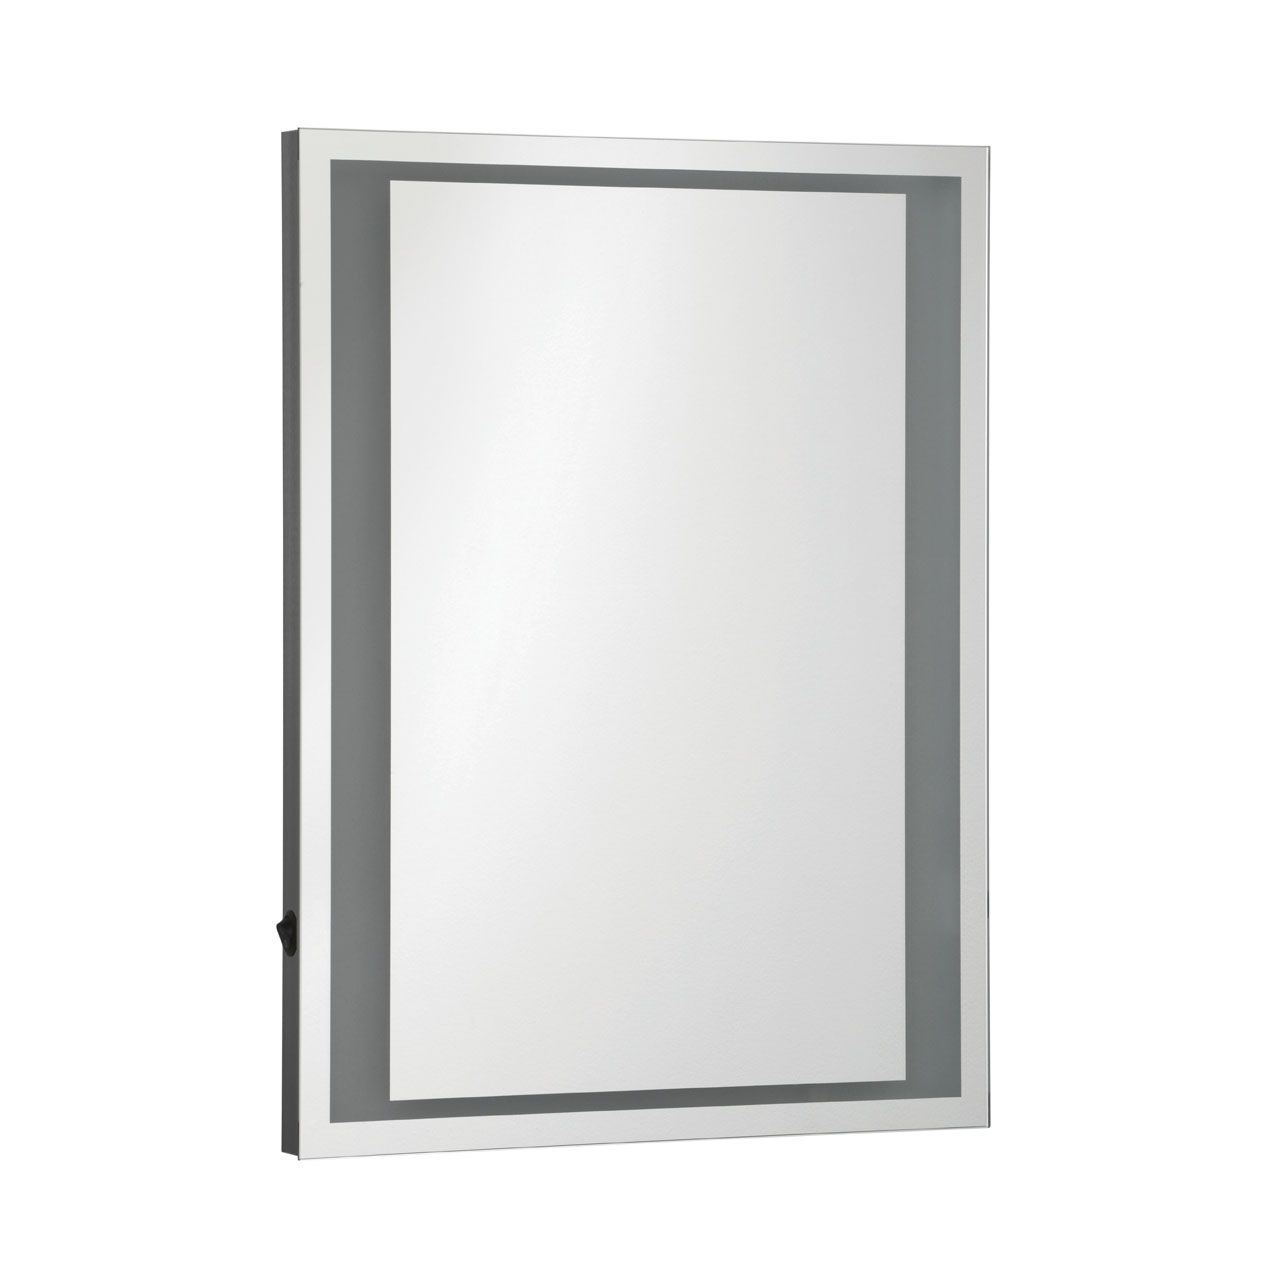 Oran Wall Bedroom Mirror In Silver Frame With Led Lights